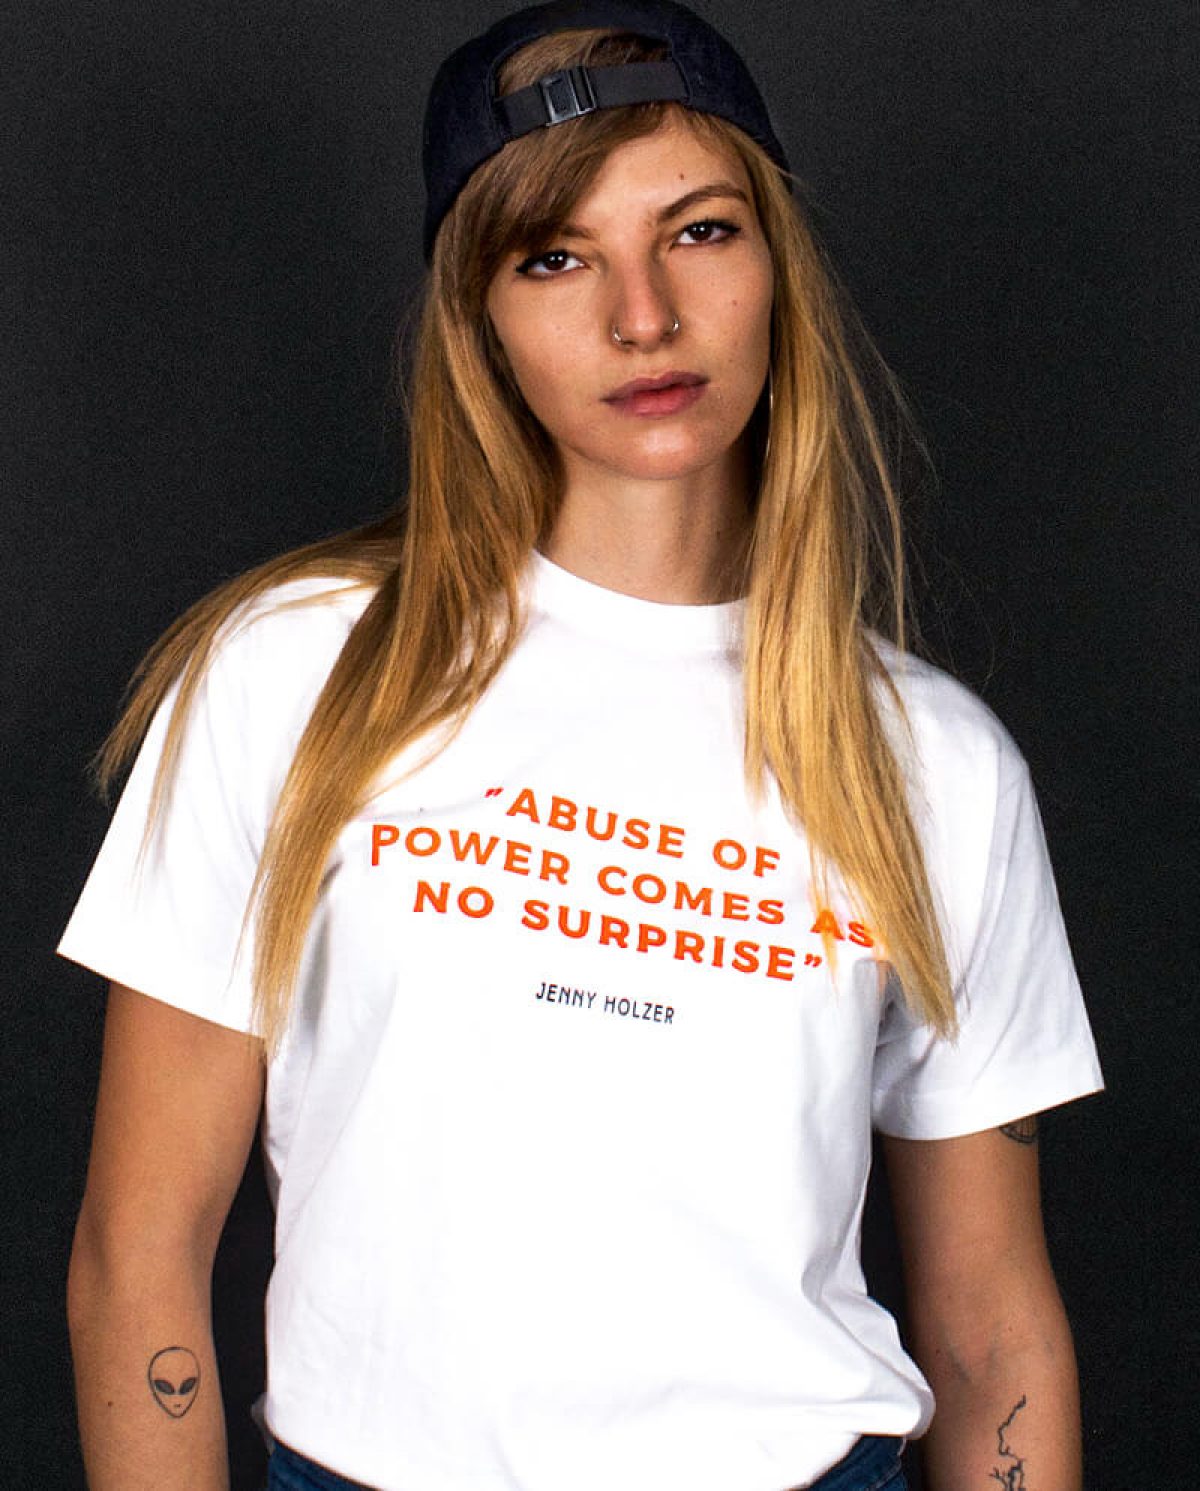 of Power Comes As No Surprise - Jenny Holzer | ALLRIOT